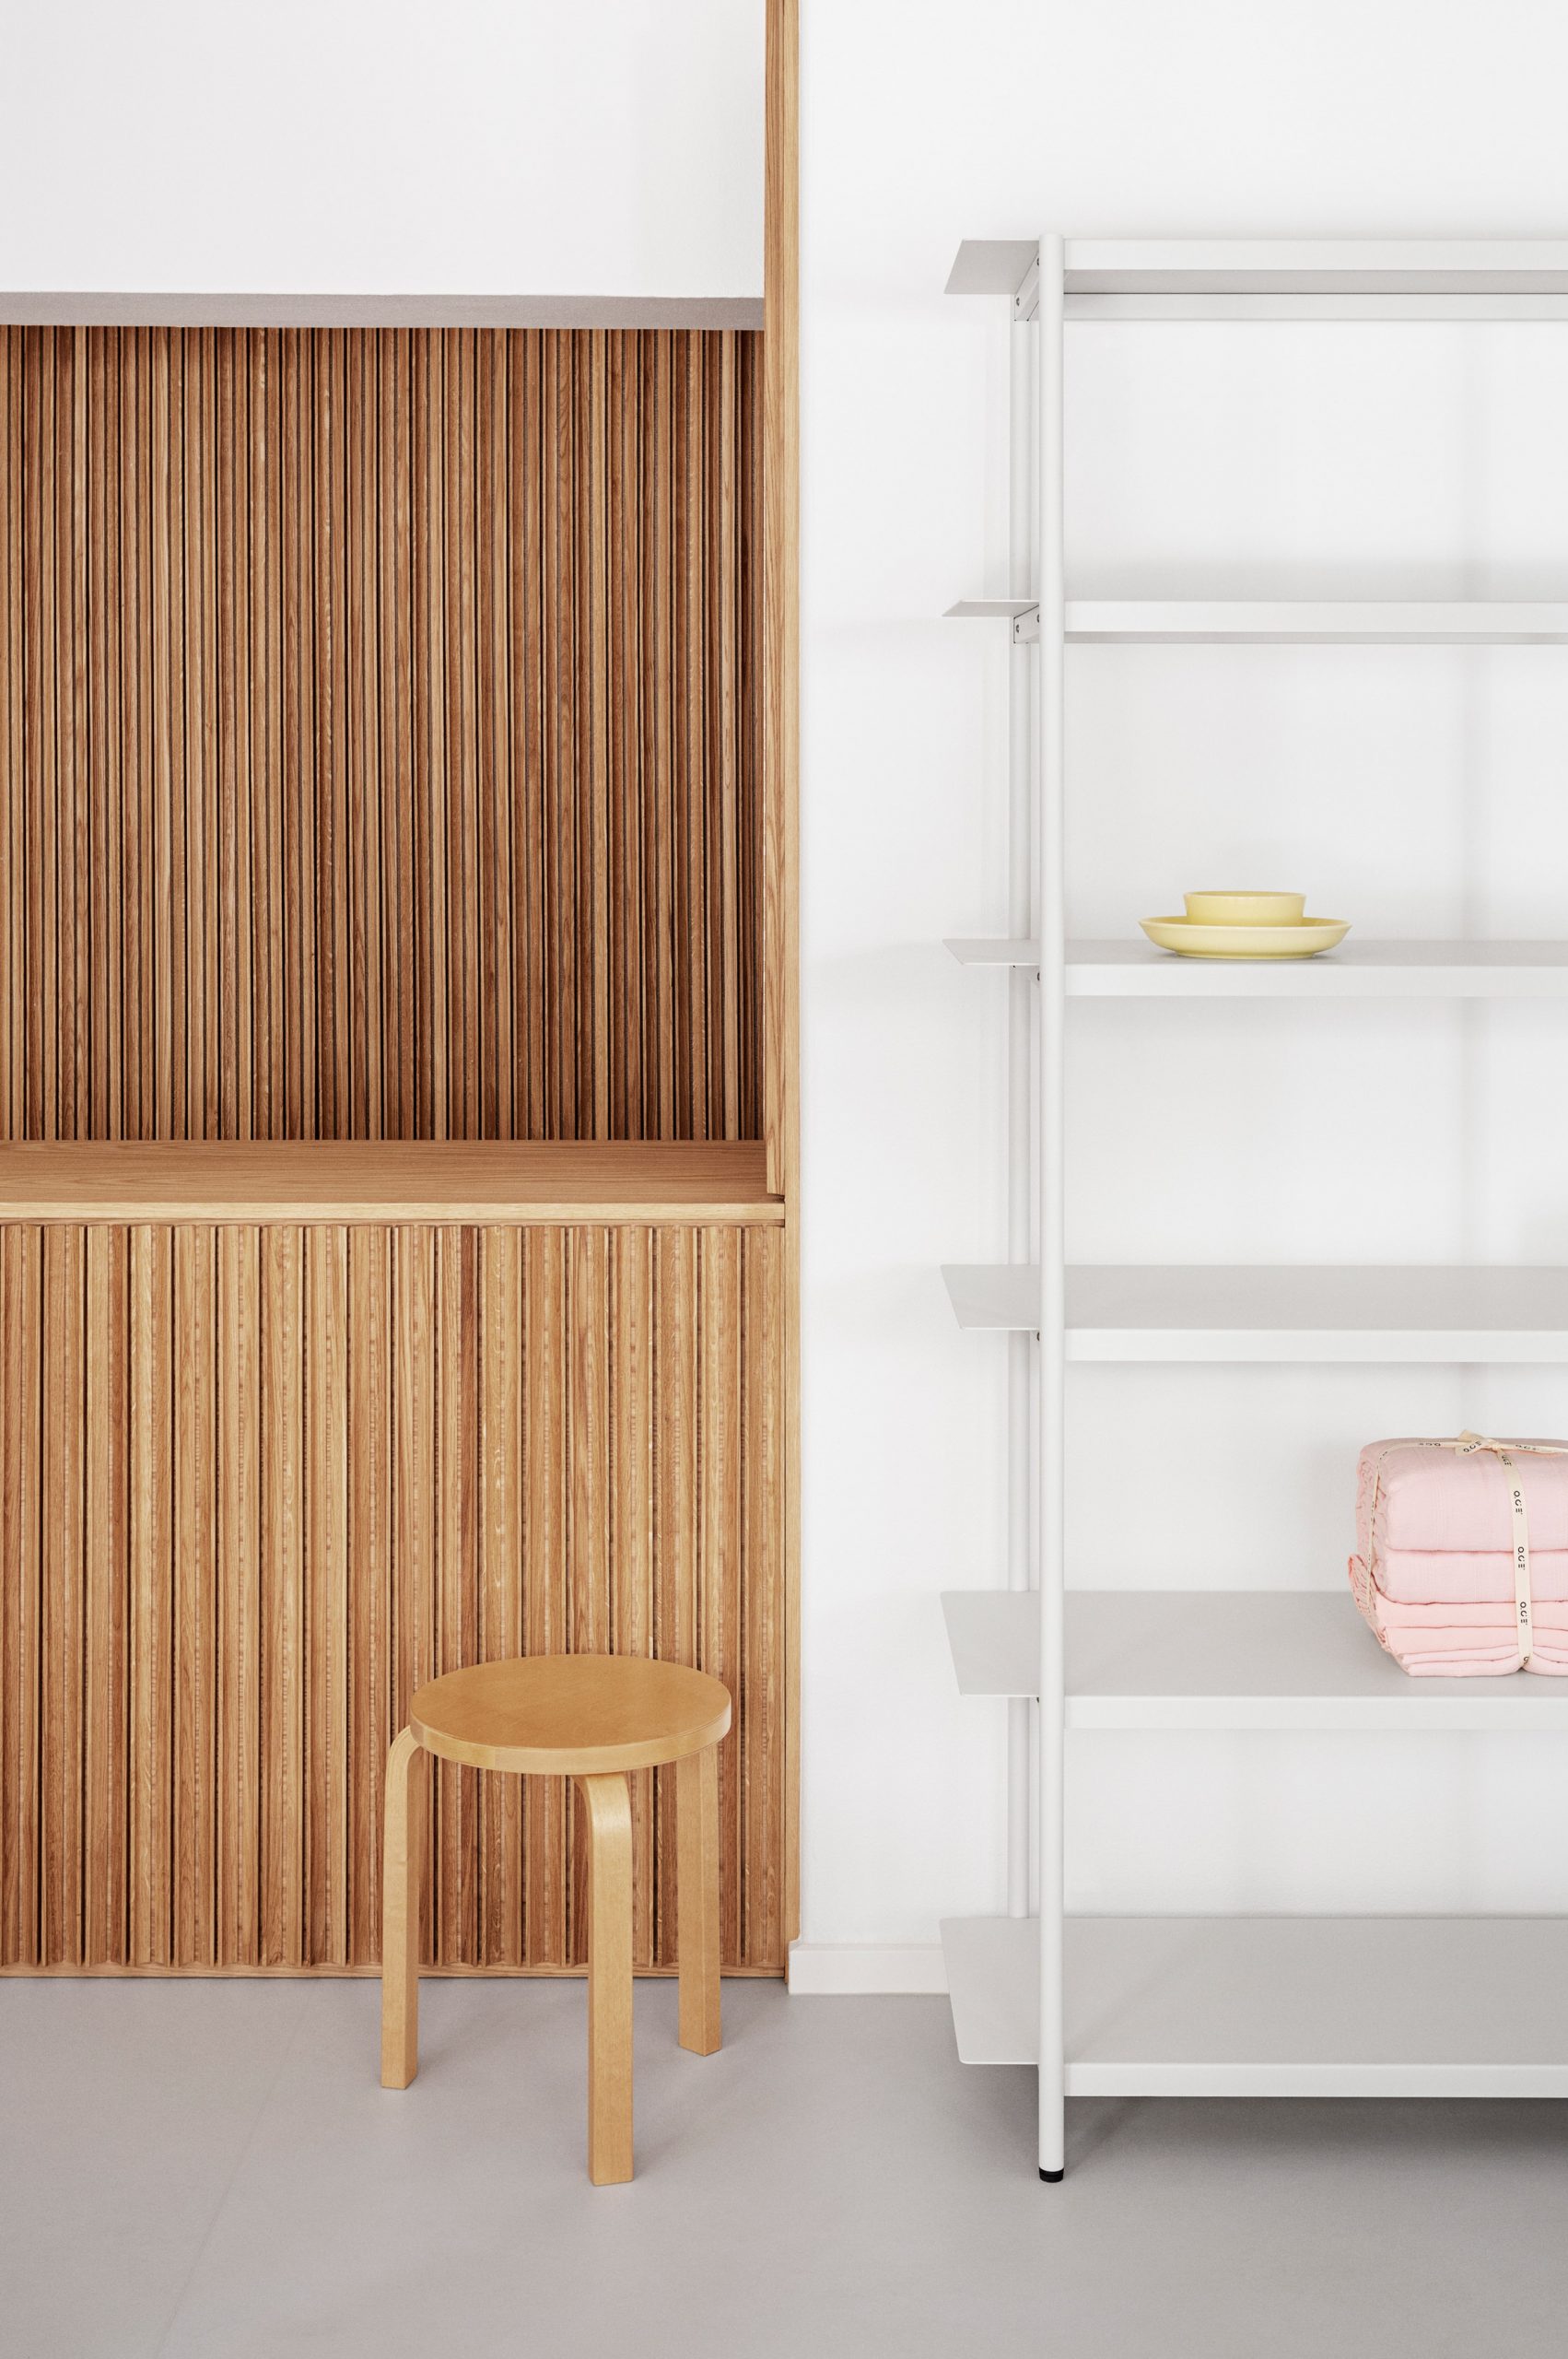 Wooden counter and white shelving in the OCE Copenhagen store interior by Aspekt Office